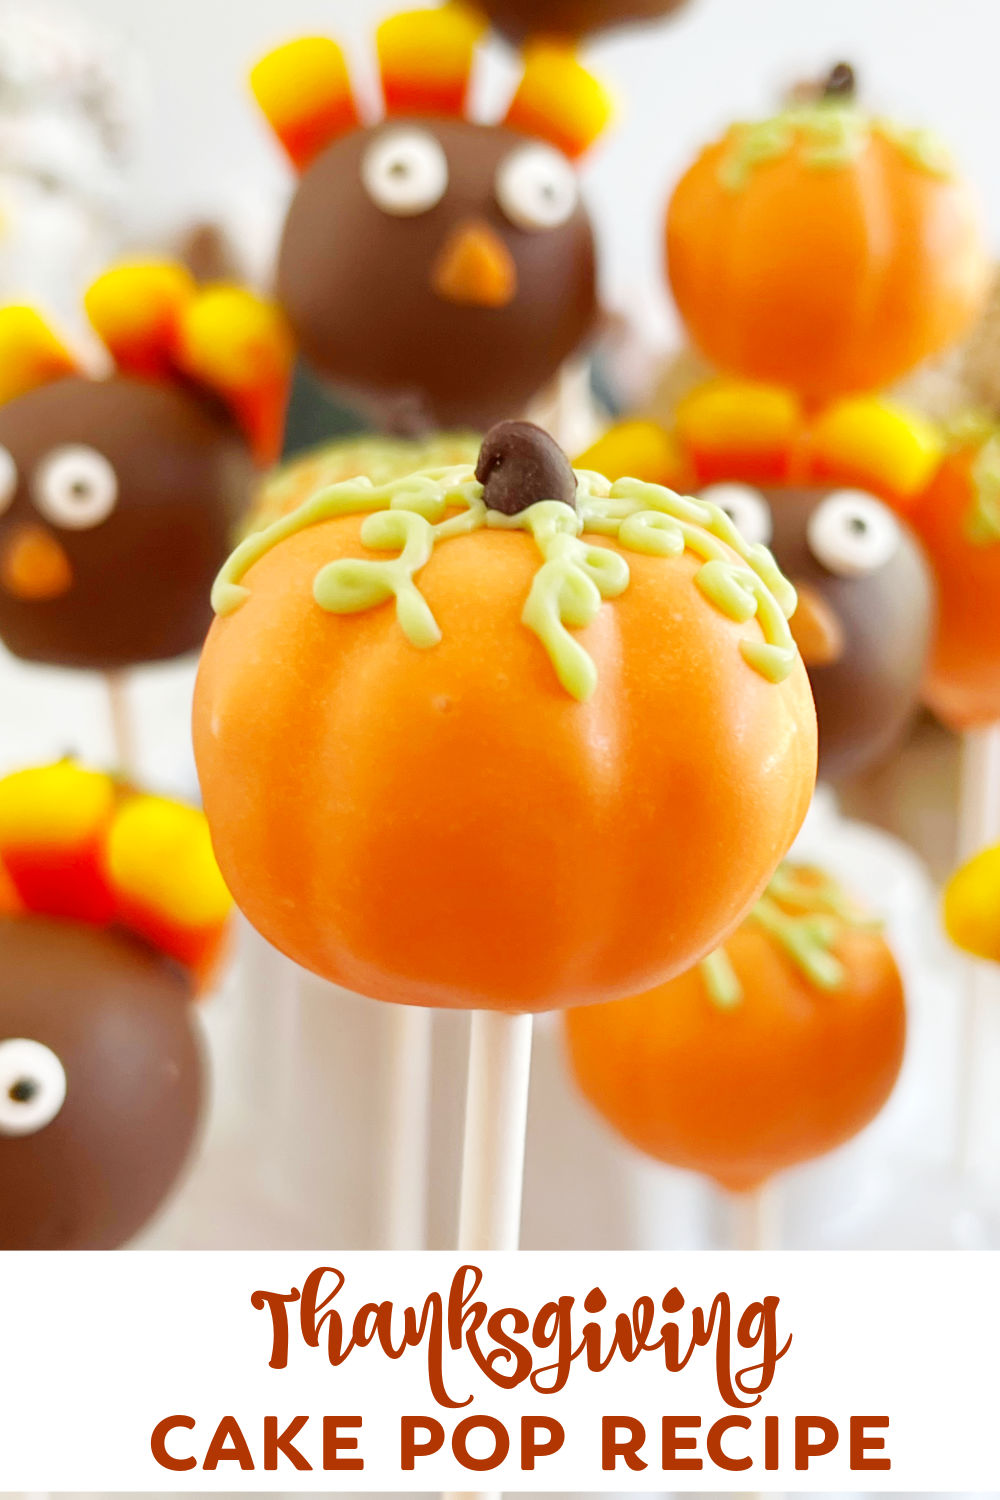 Make adorable Thanksgiving Cake Pops with this easy Thanksgiving cake pop recipe for turkey cake pops and pumpkin cake pops. A fun dessert for your Thanksgiving table! via @meamel